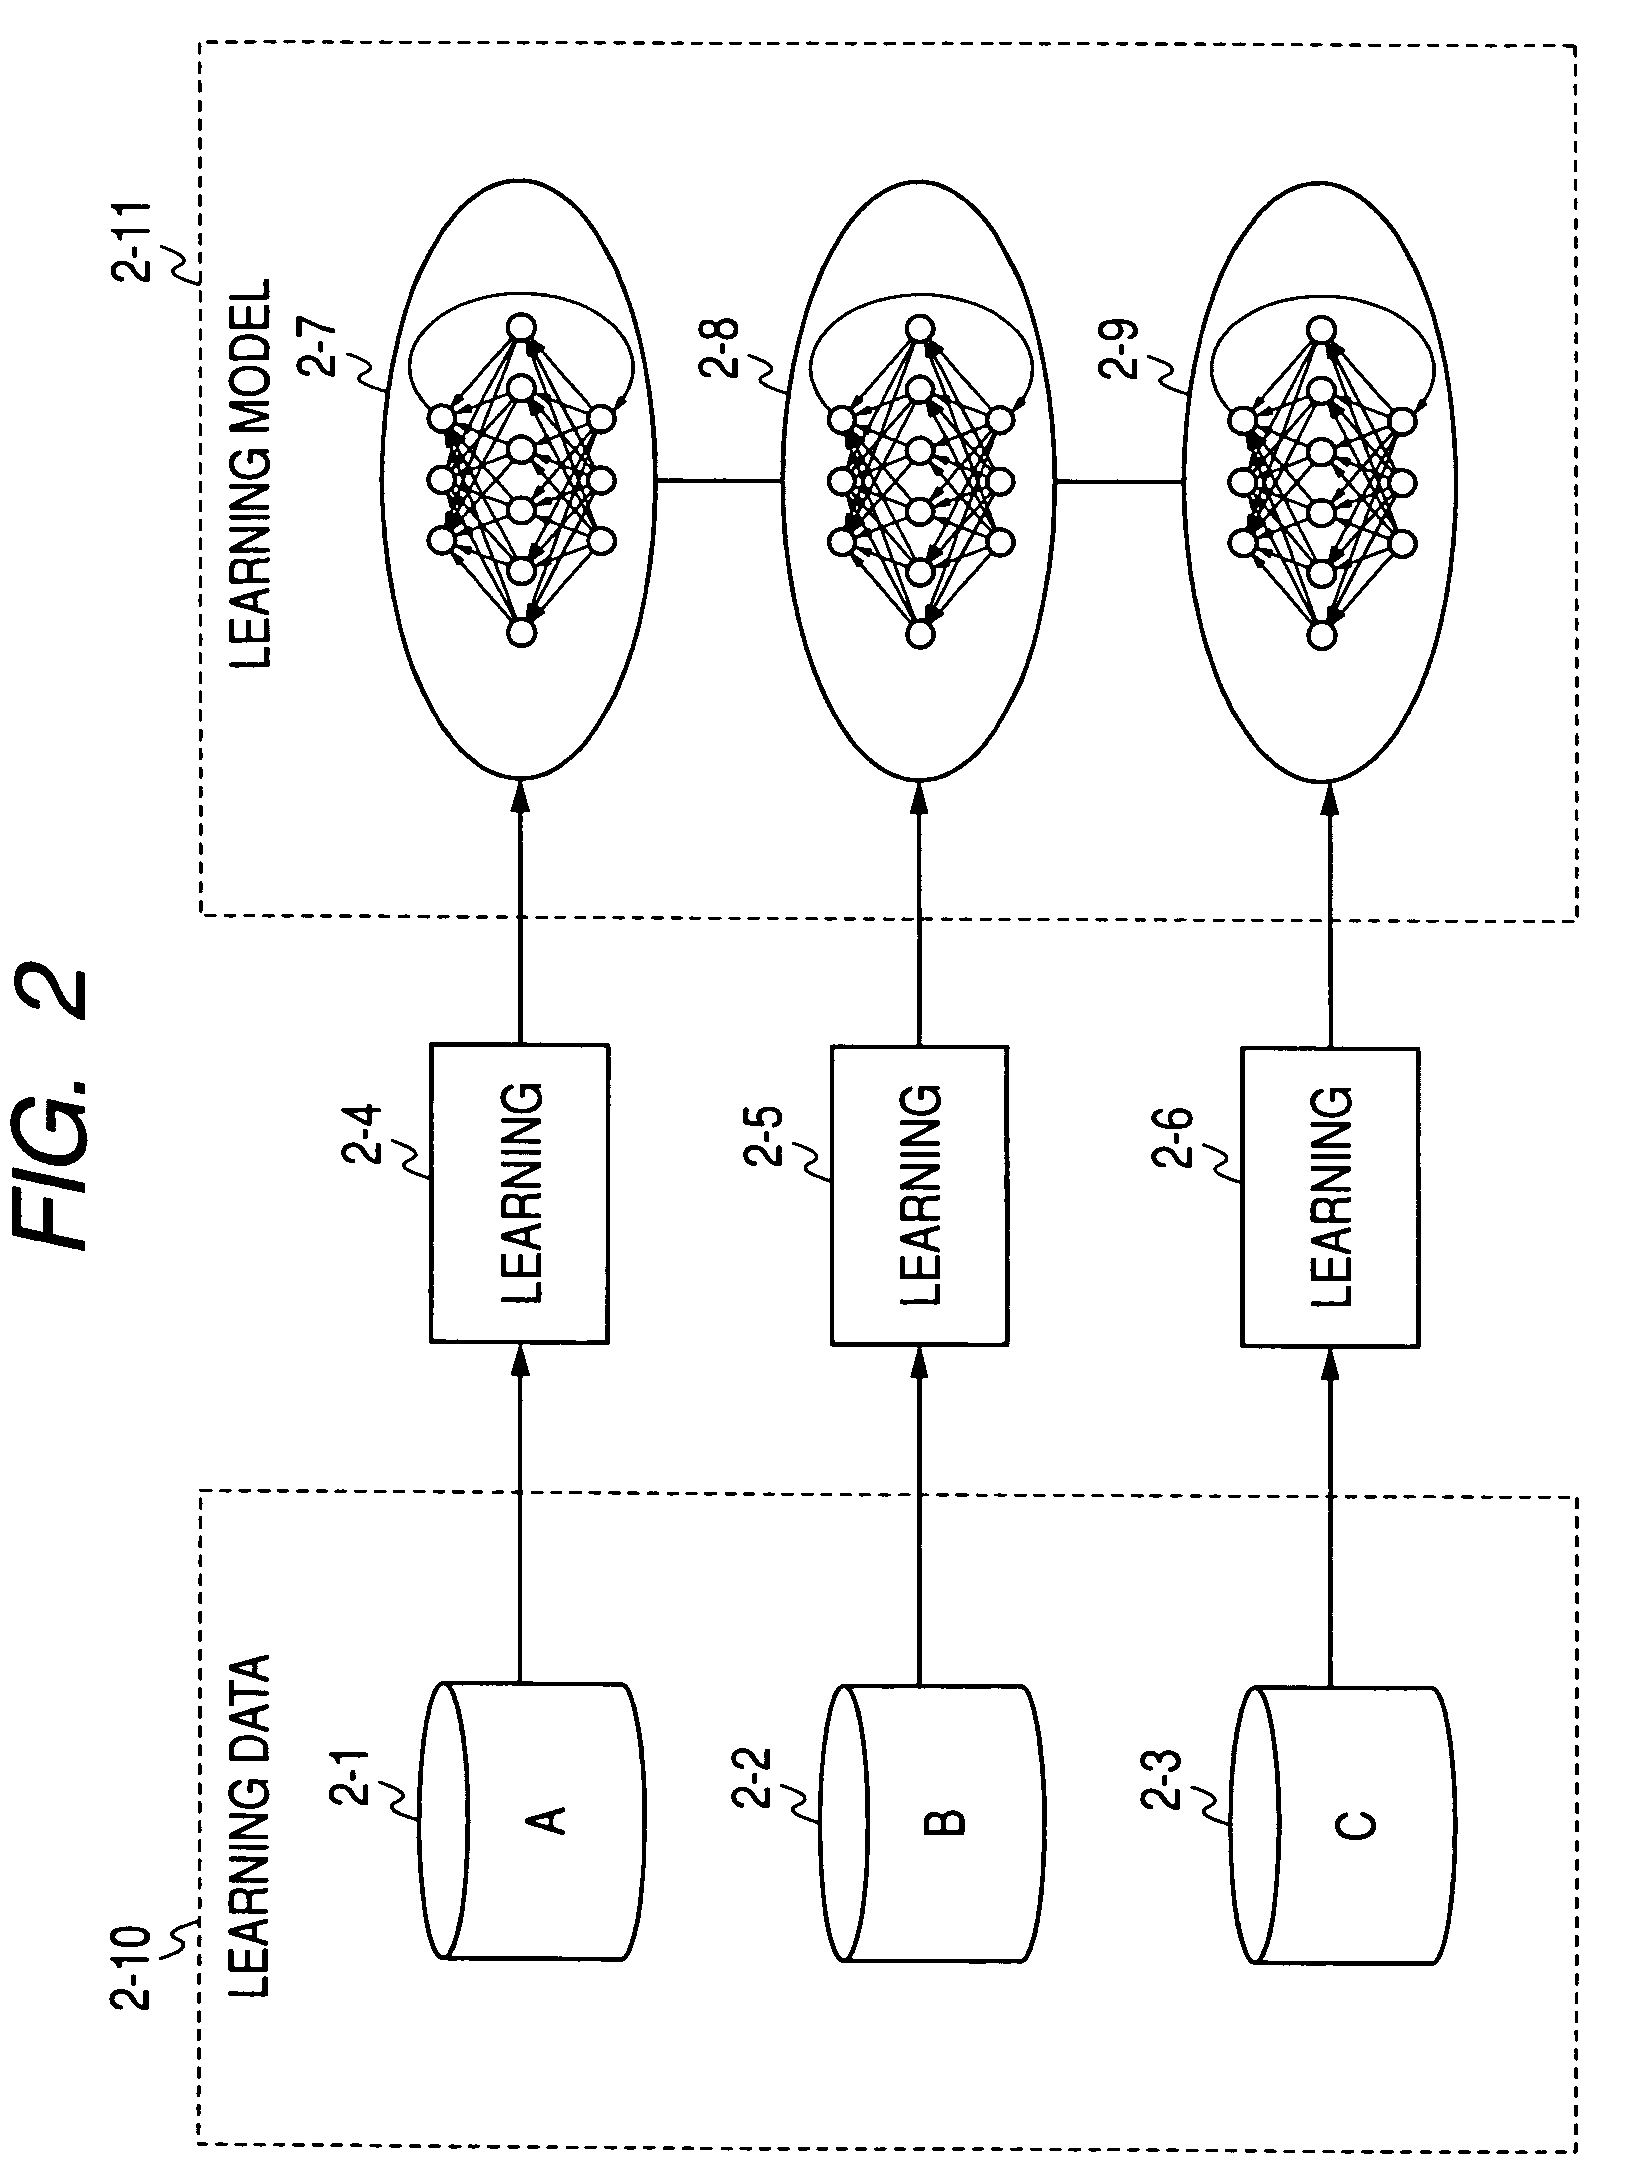 Apparatus and method for embedding recurrent neural networks into the nodes of a self-organizing map